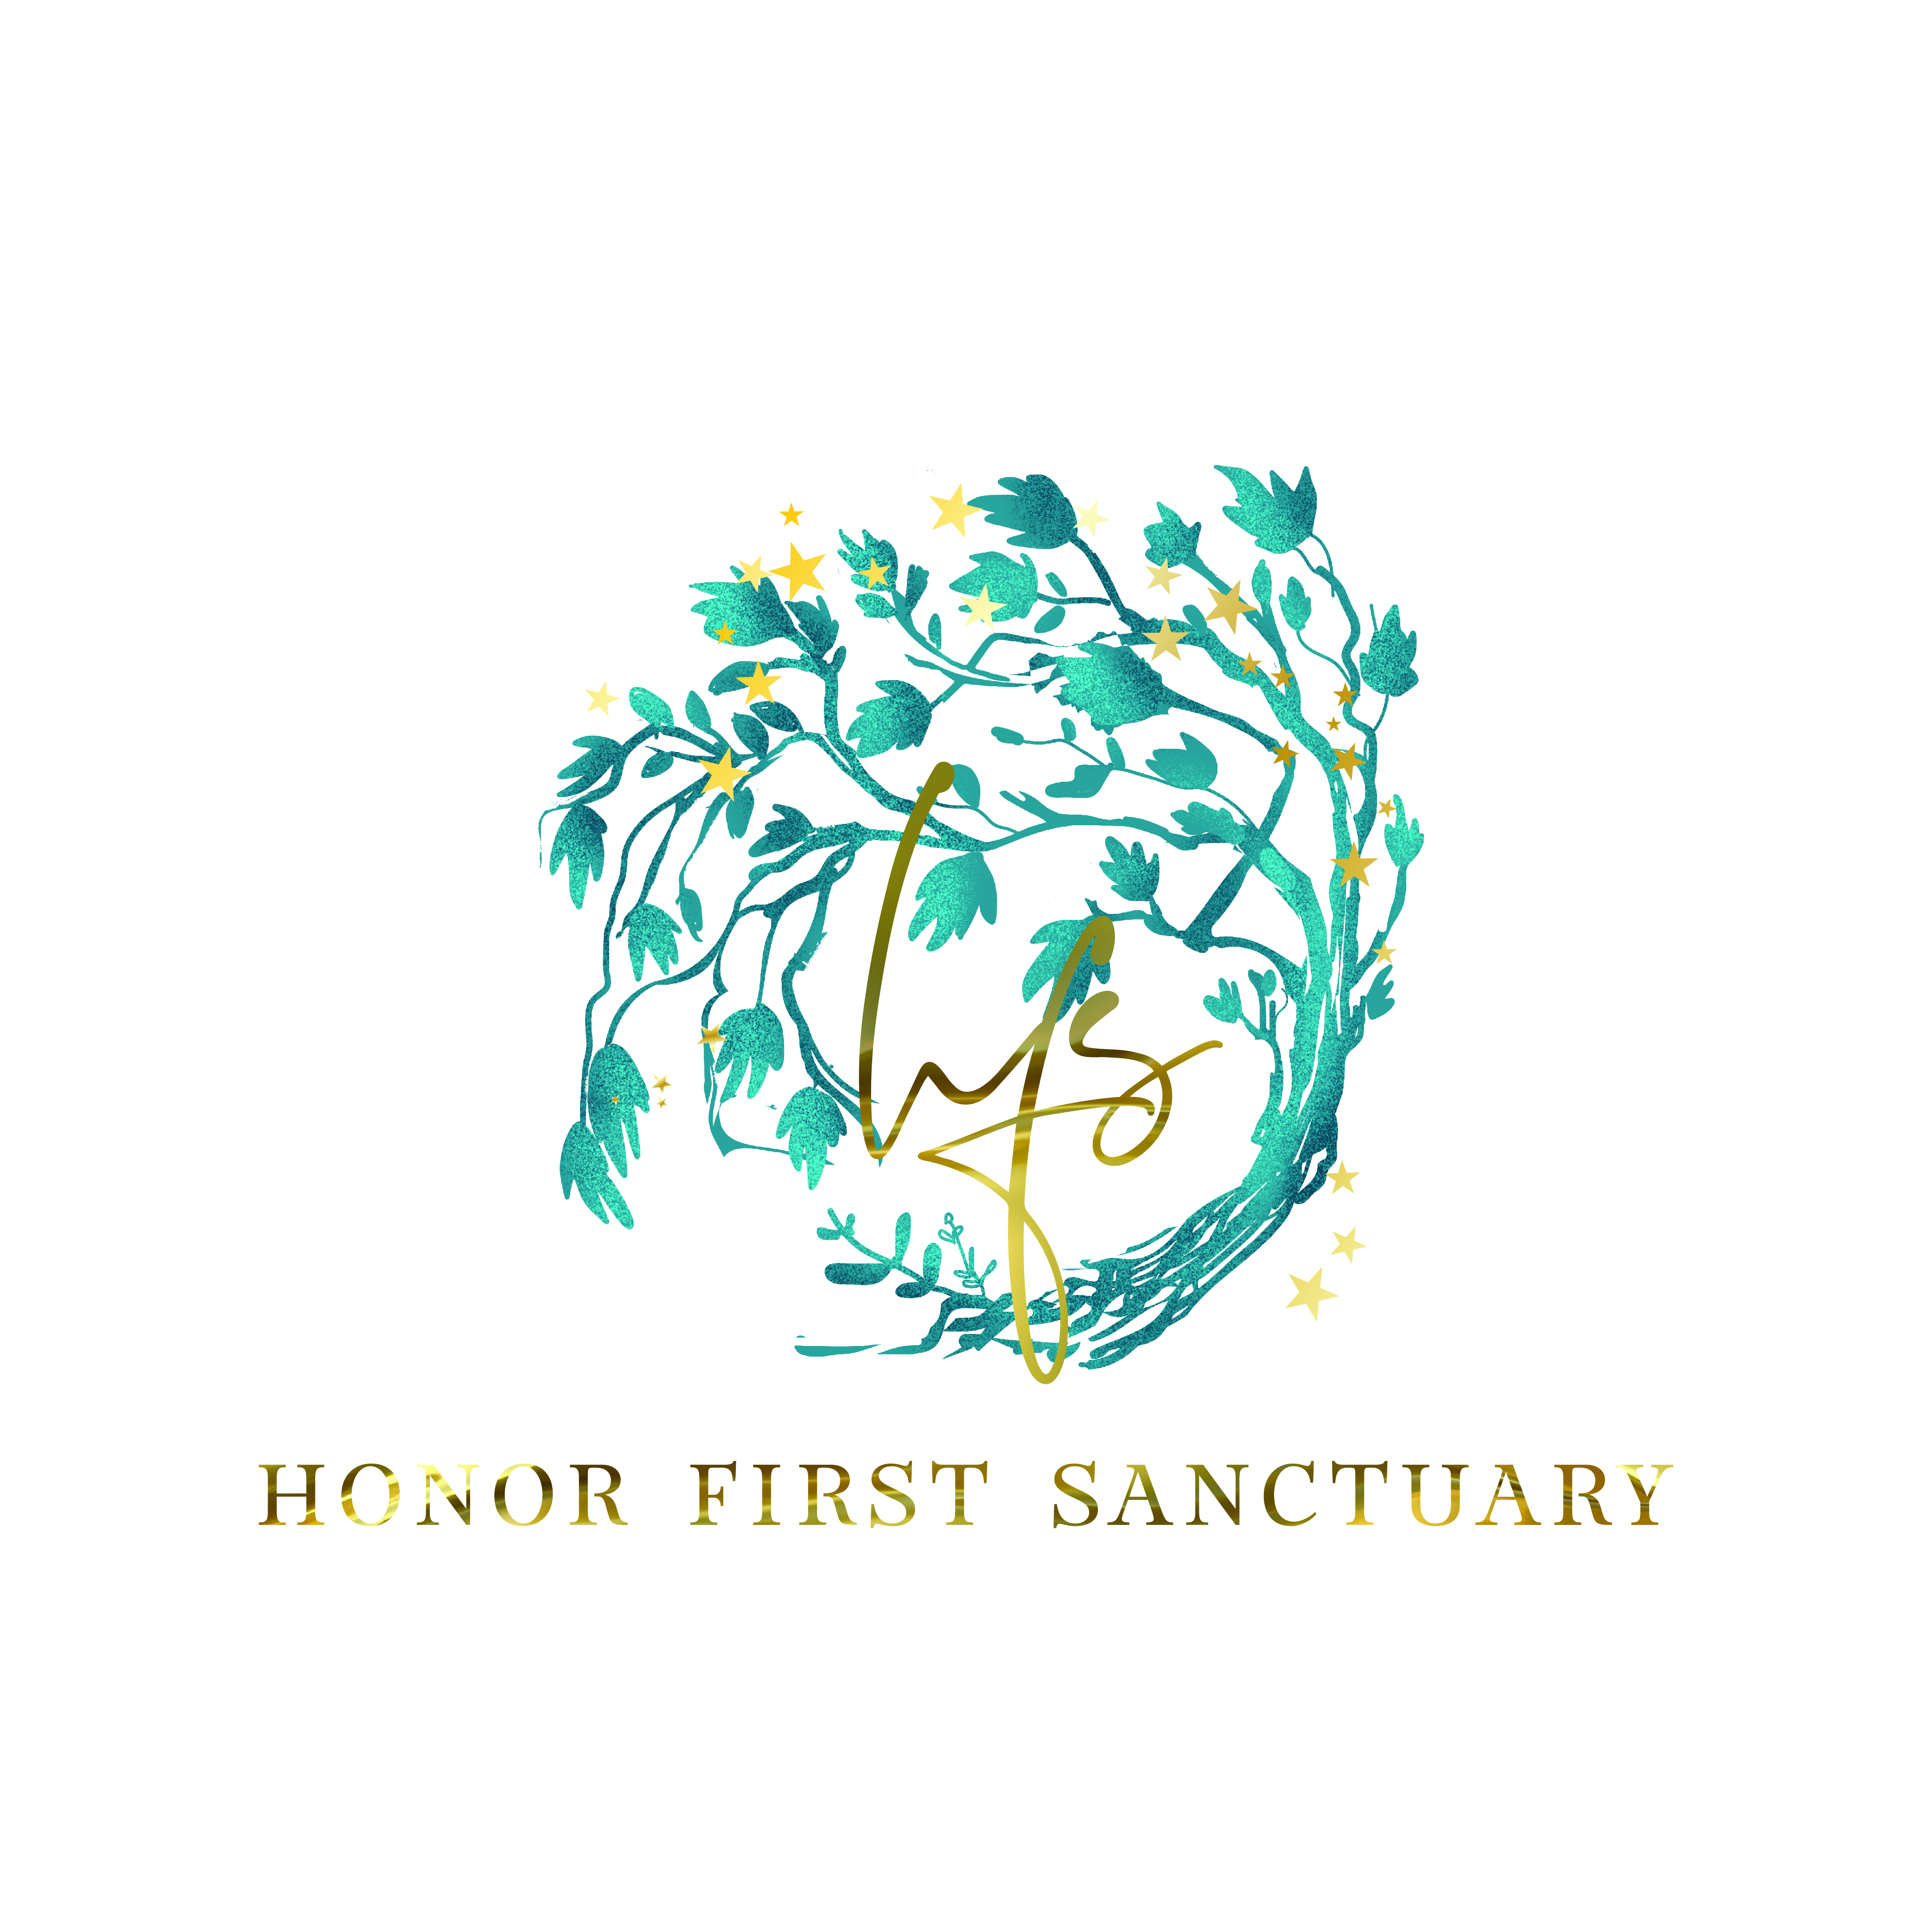 Honor First Sanctuary logo